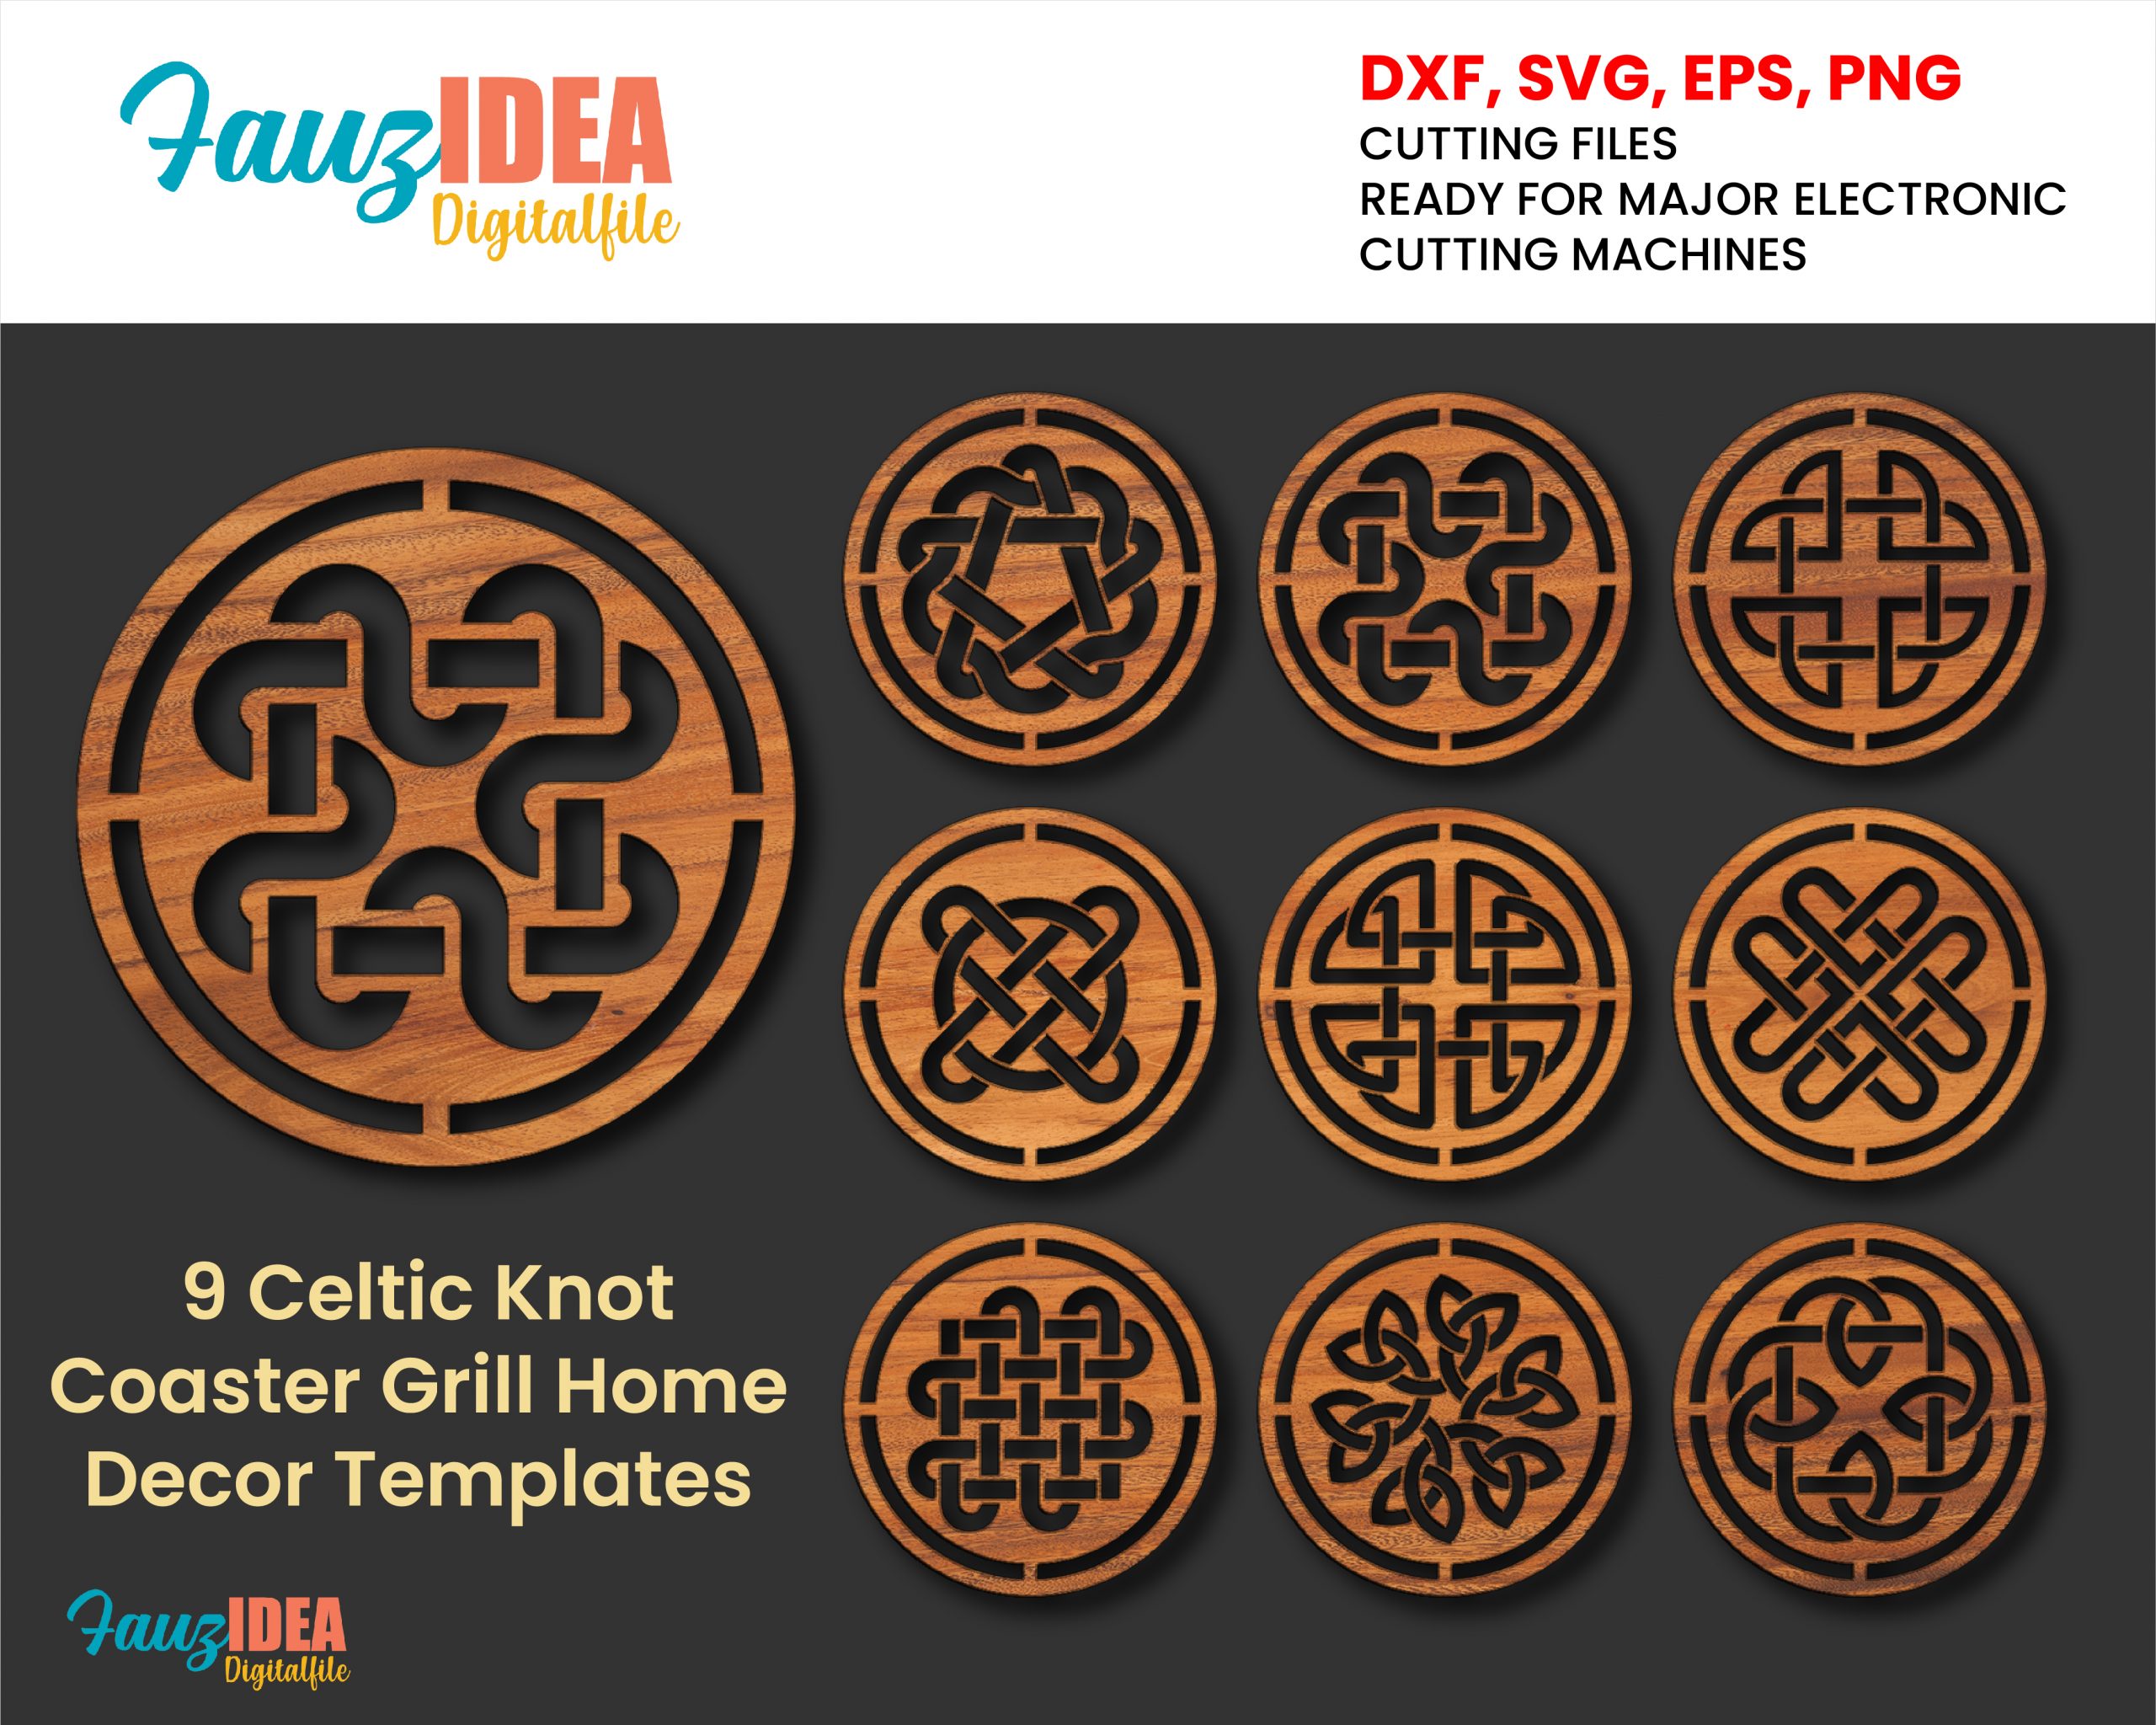 9. Celtic Knot Nail Art Supplies - wide 2